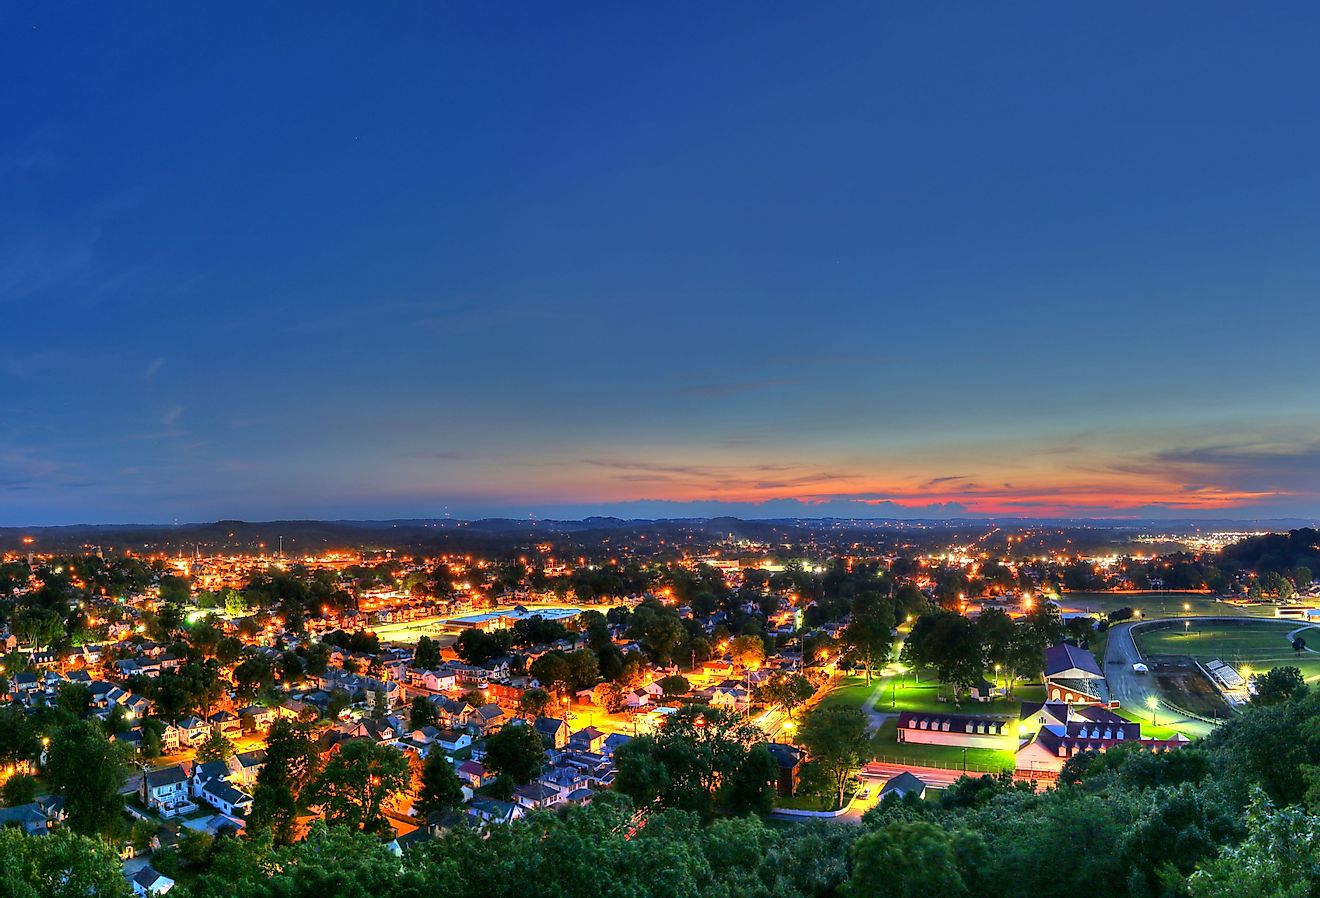 Aerial view of city lights at dusk in Lancaster, Ohio.